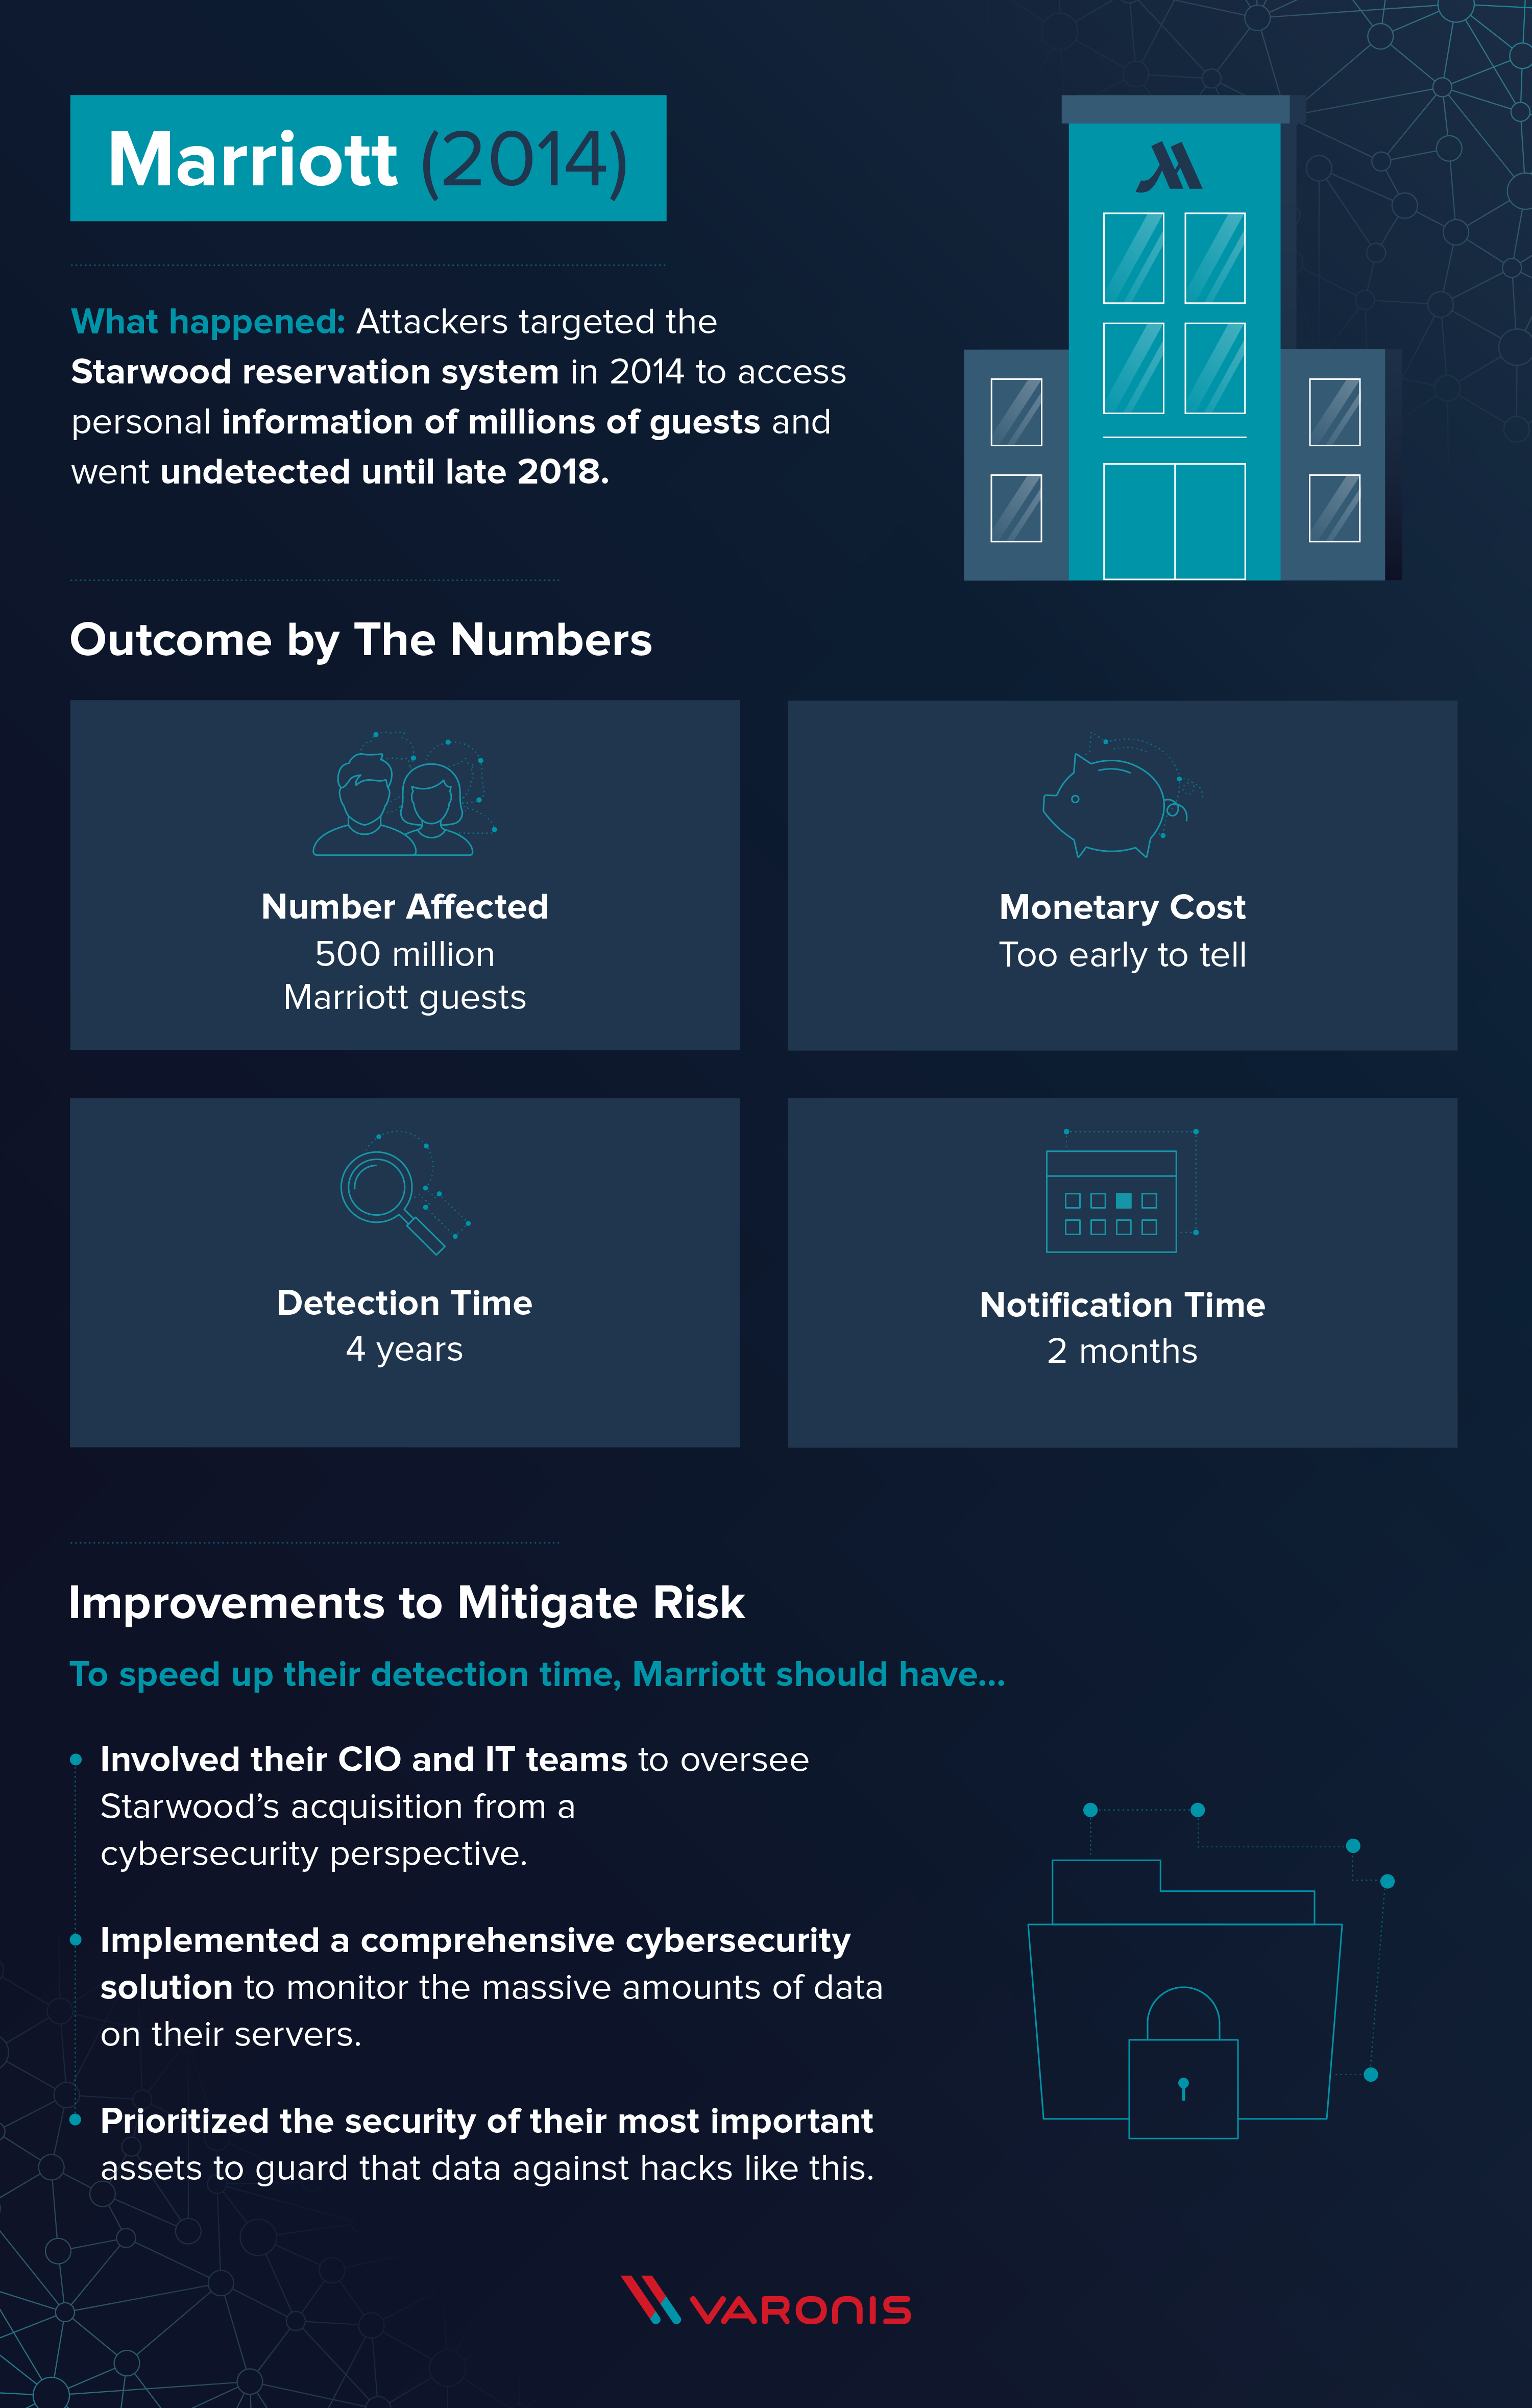 Data Breach Response Times Trends and Tips